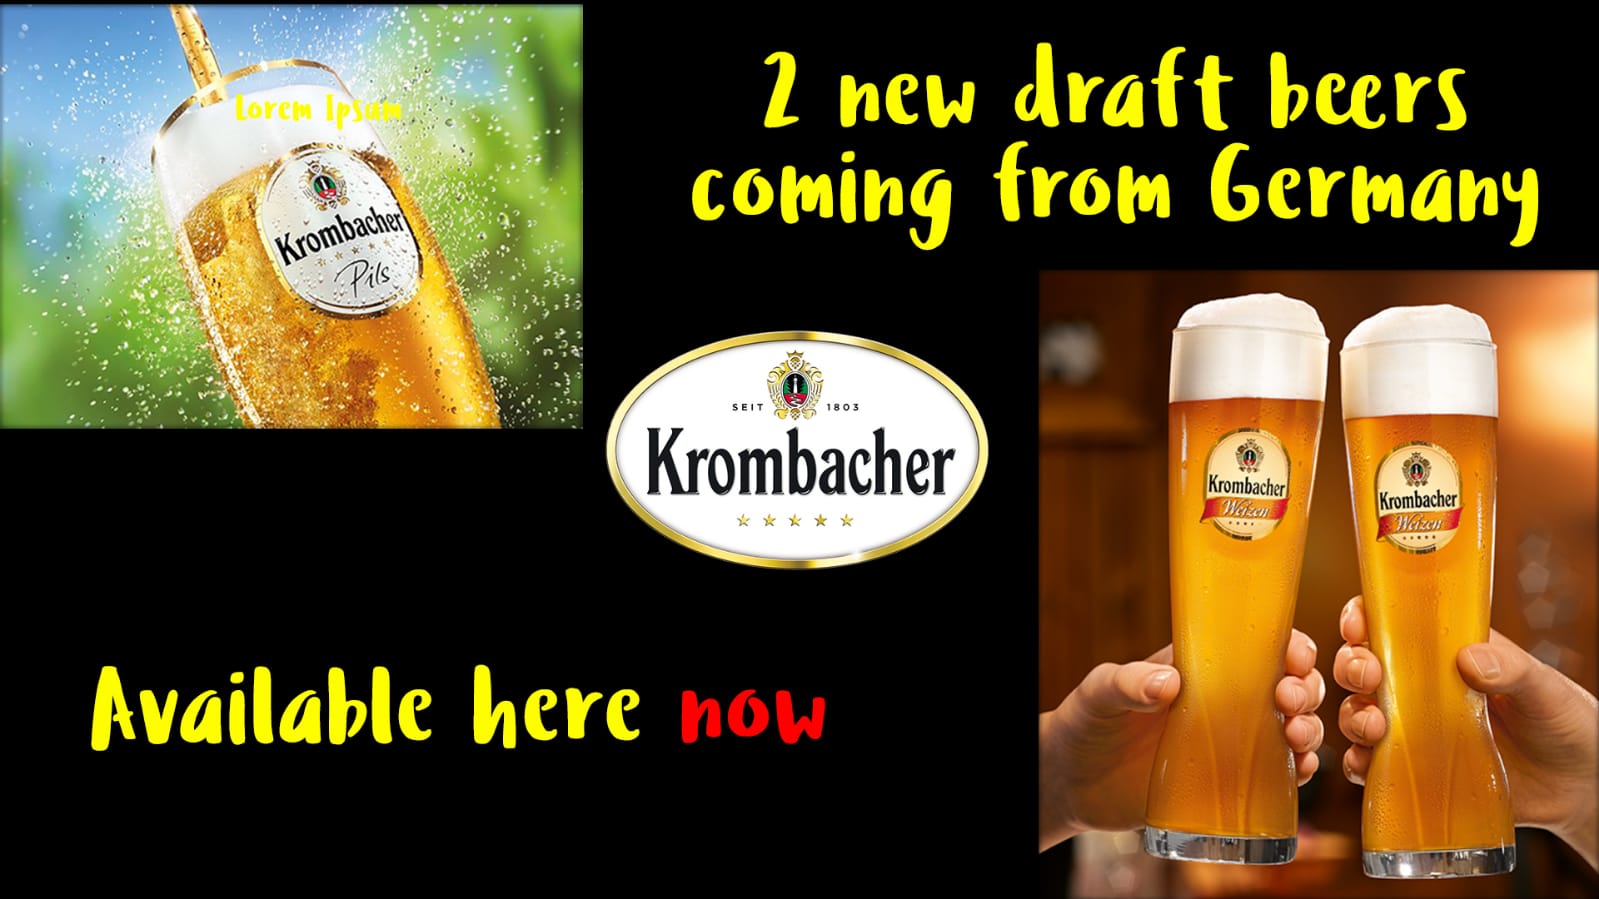 2 New Draft Beers Coming From Germany, Krombacher, Available Here Now at The Penalty Spot, Sport and Music Pub, Sukhumvit, Bangkok, Thailand